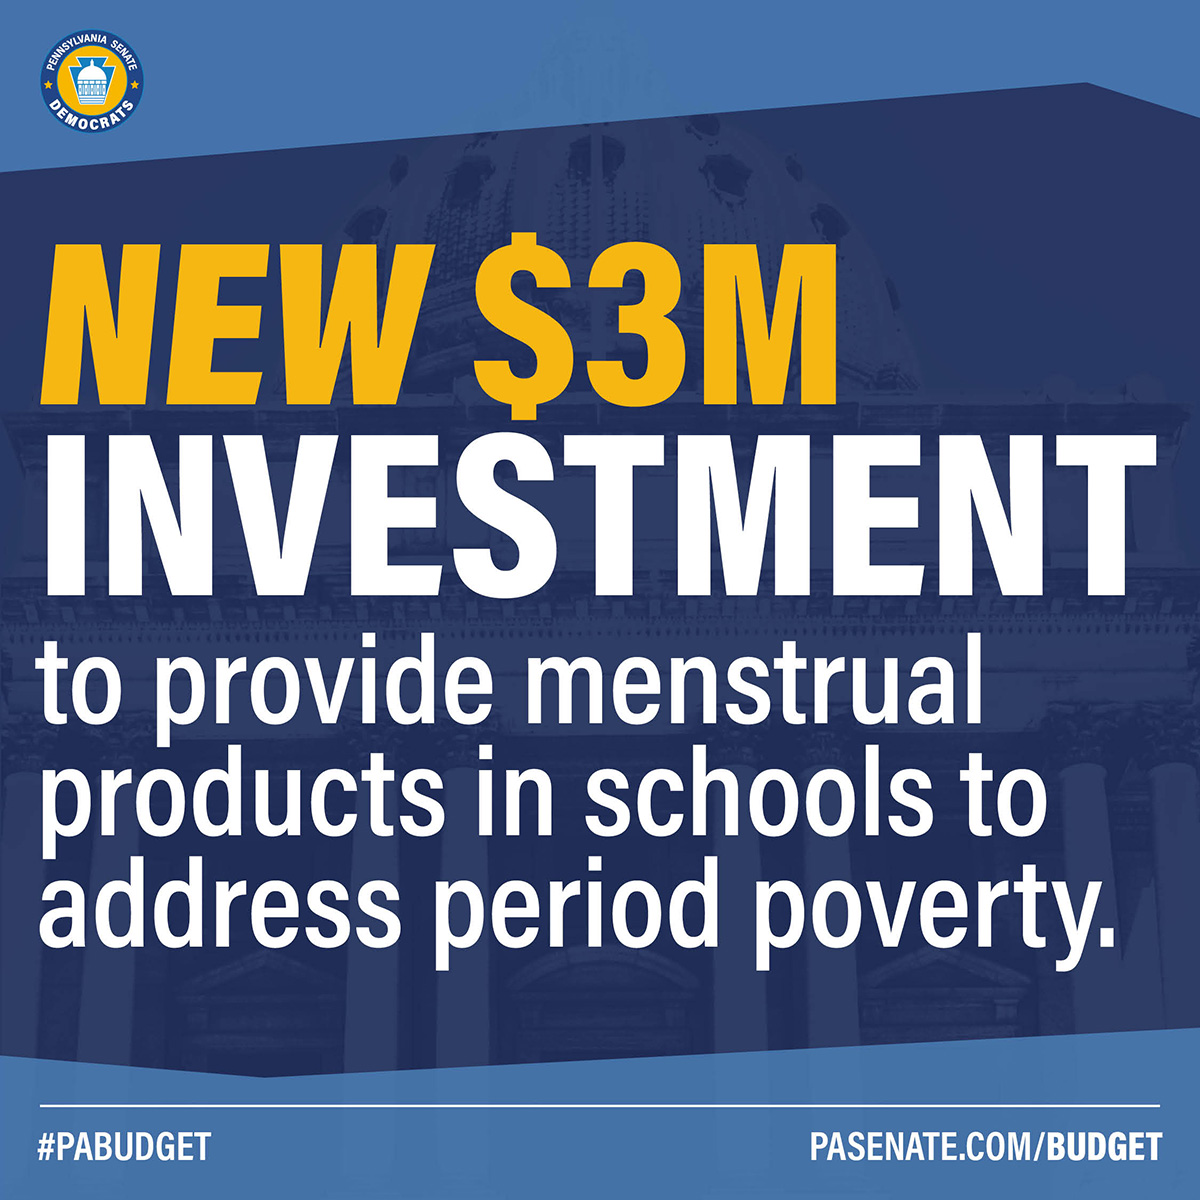 NEW $3M investment to provide menstrual products in schools to address period poverty